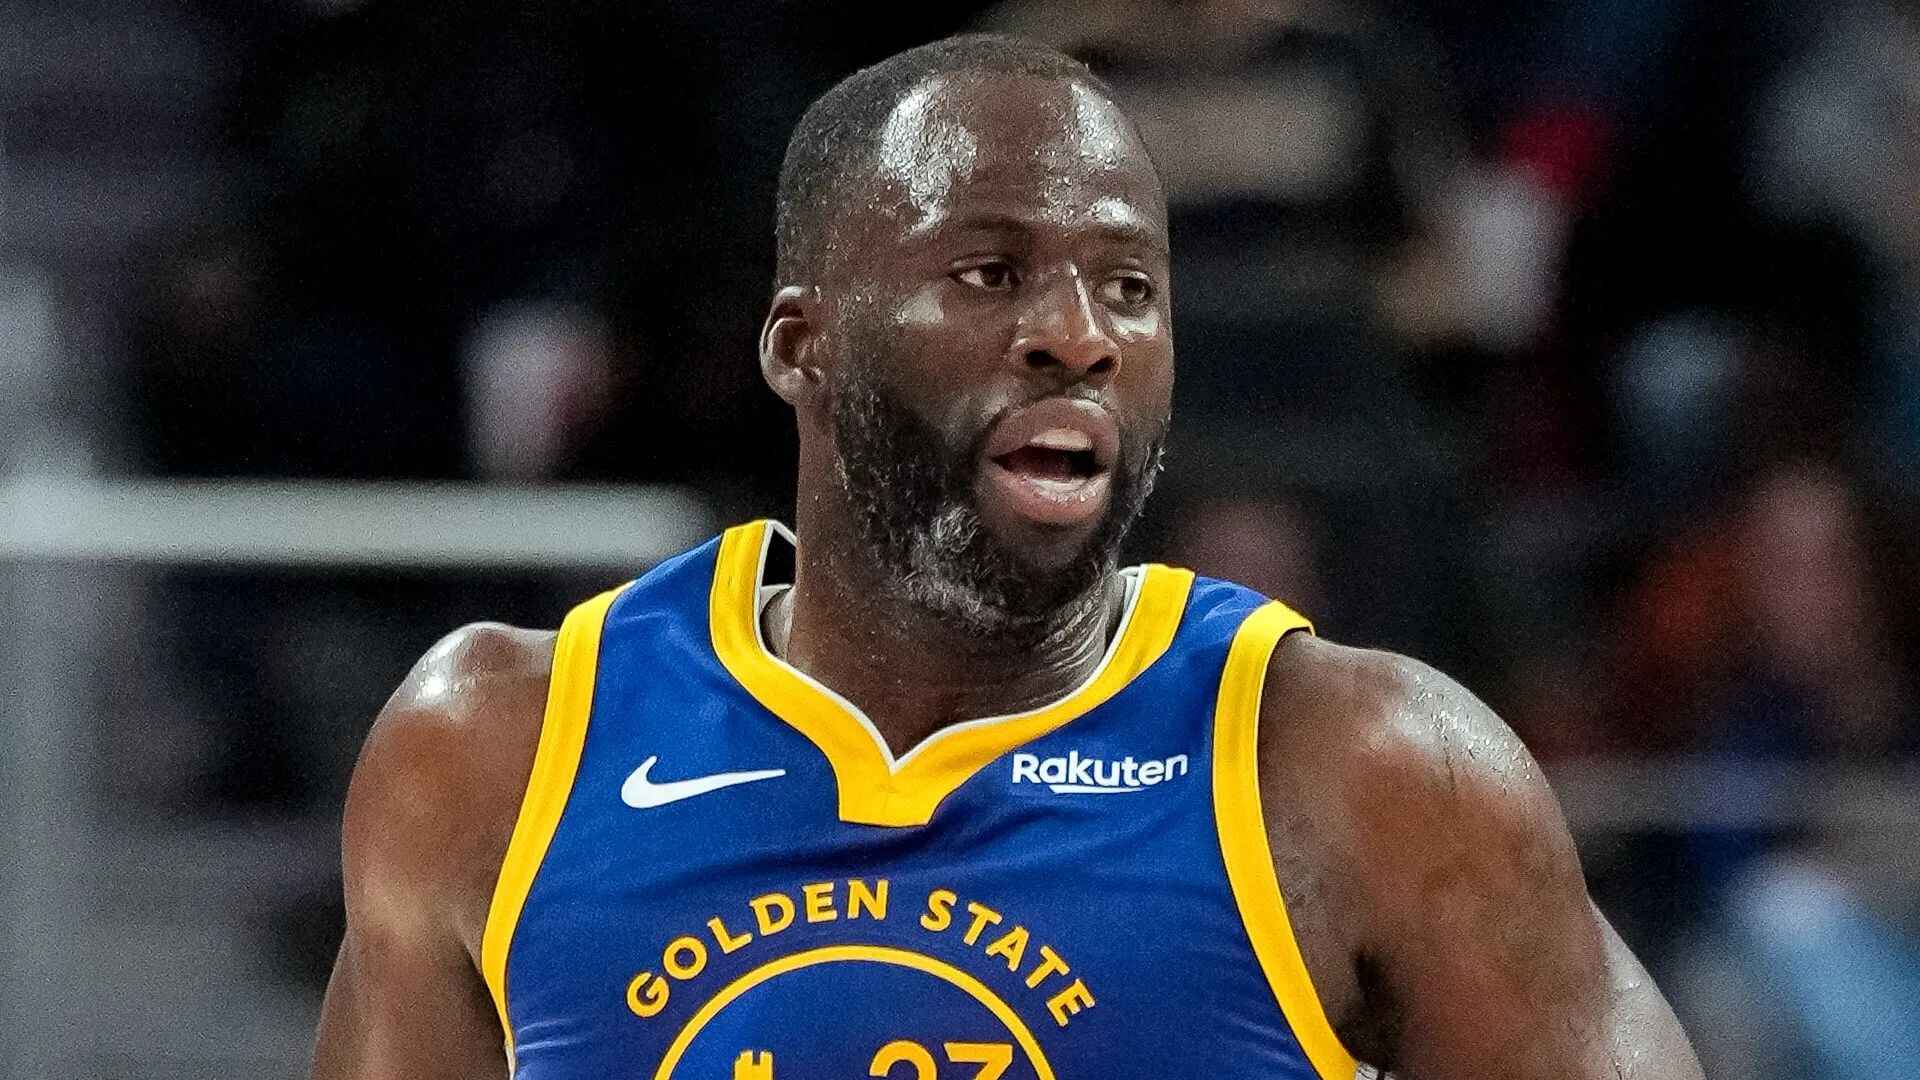 draymond-green-receives-heavy-boos-in-first-game-back-after-suspension